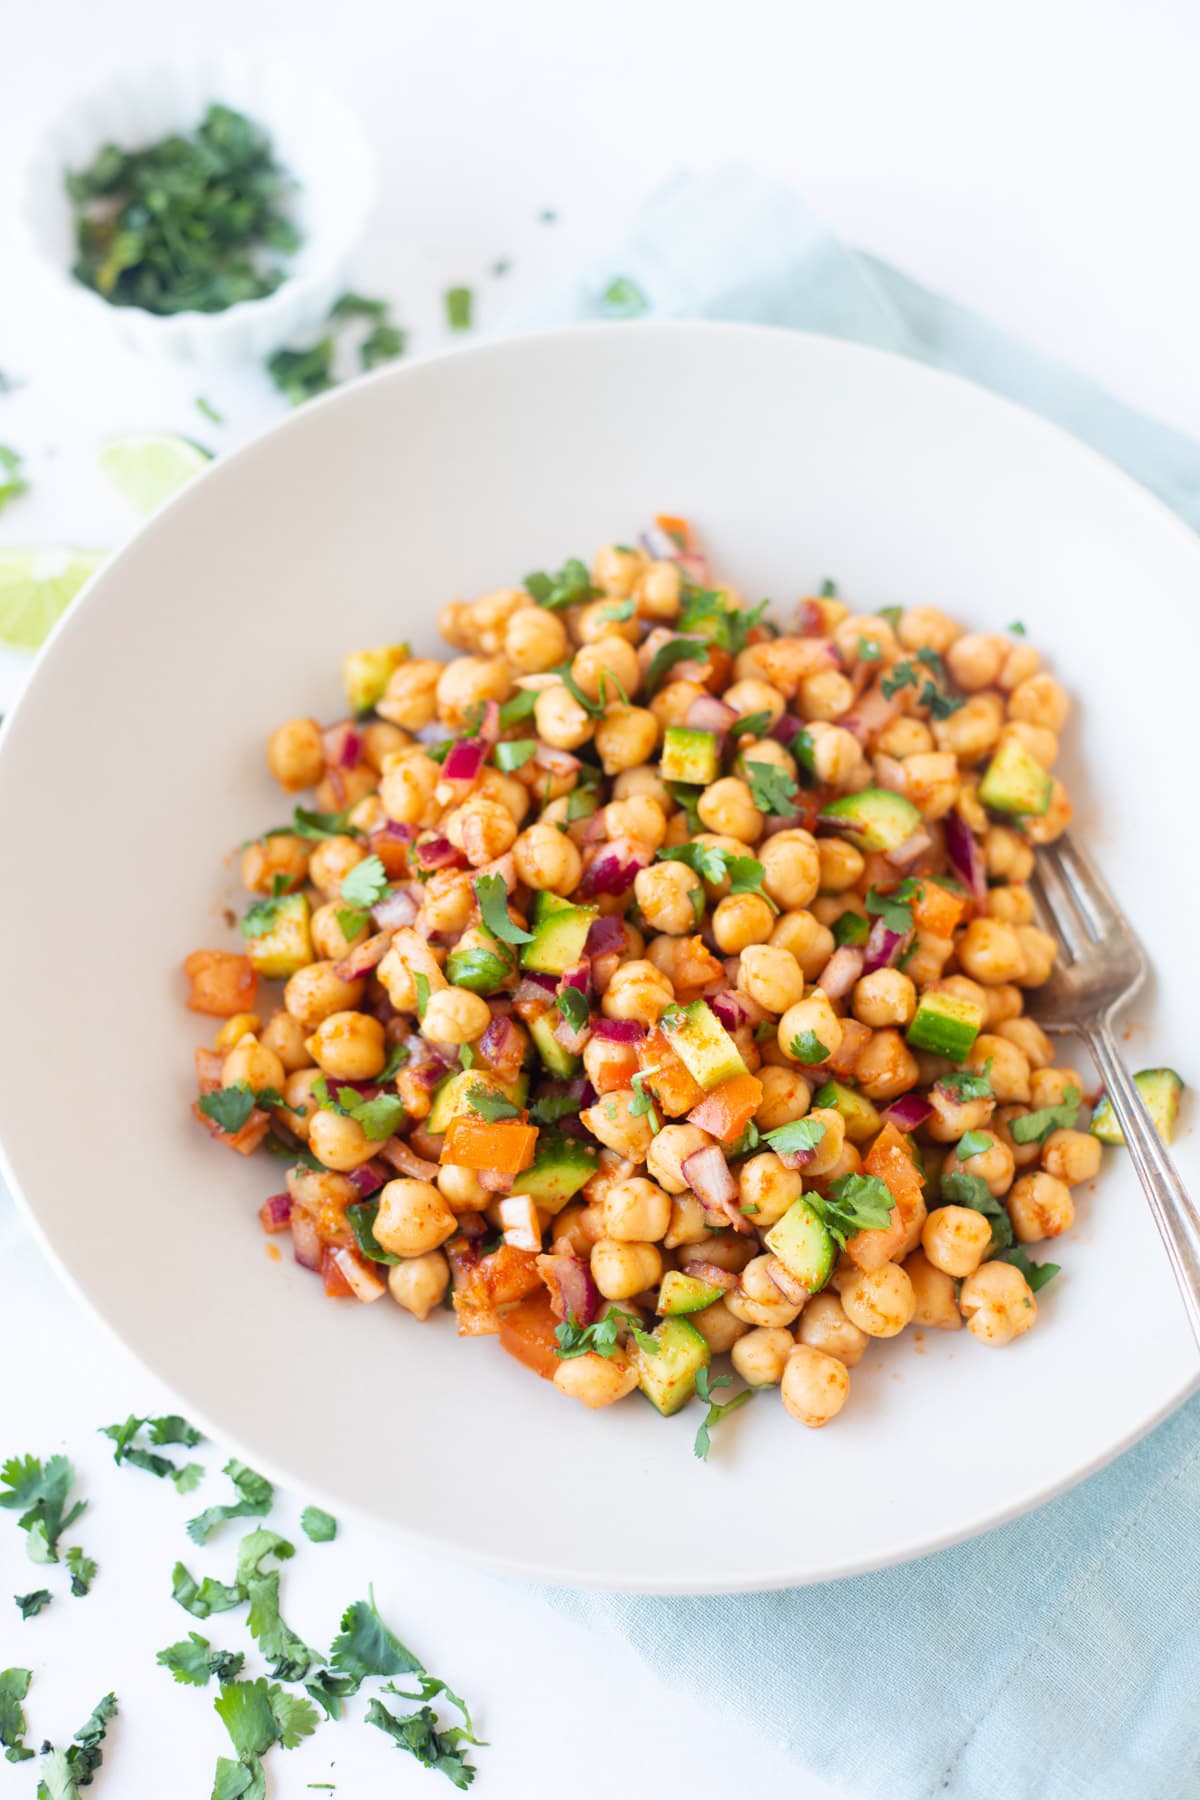 Easy garbanzo bean salad with veggies and spices in a white bowl